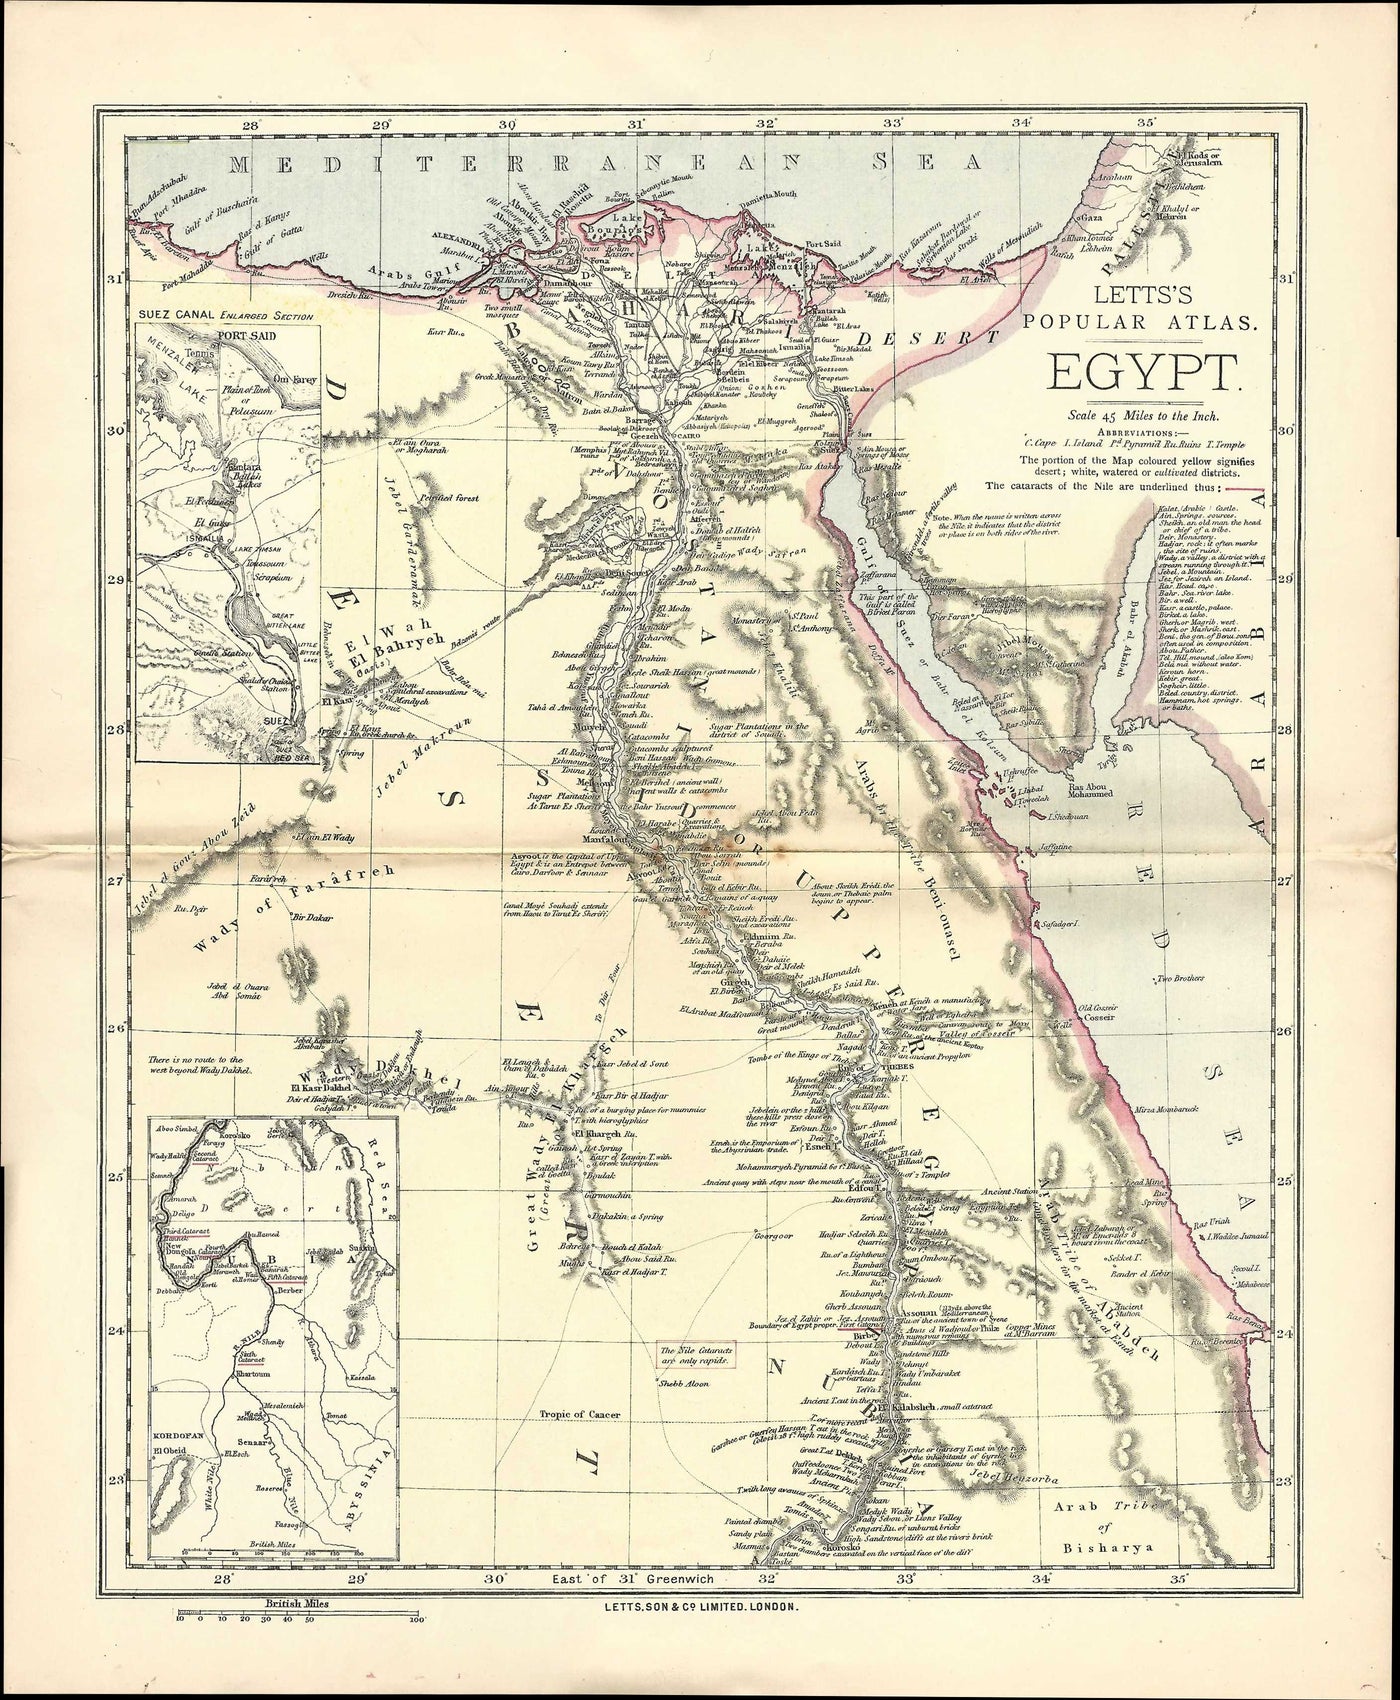 Egypt antique map from “Letts’s Popular Atlas,” published in 1881.